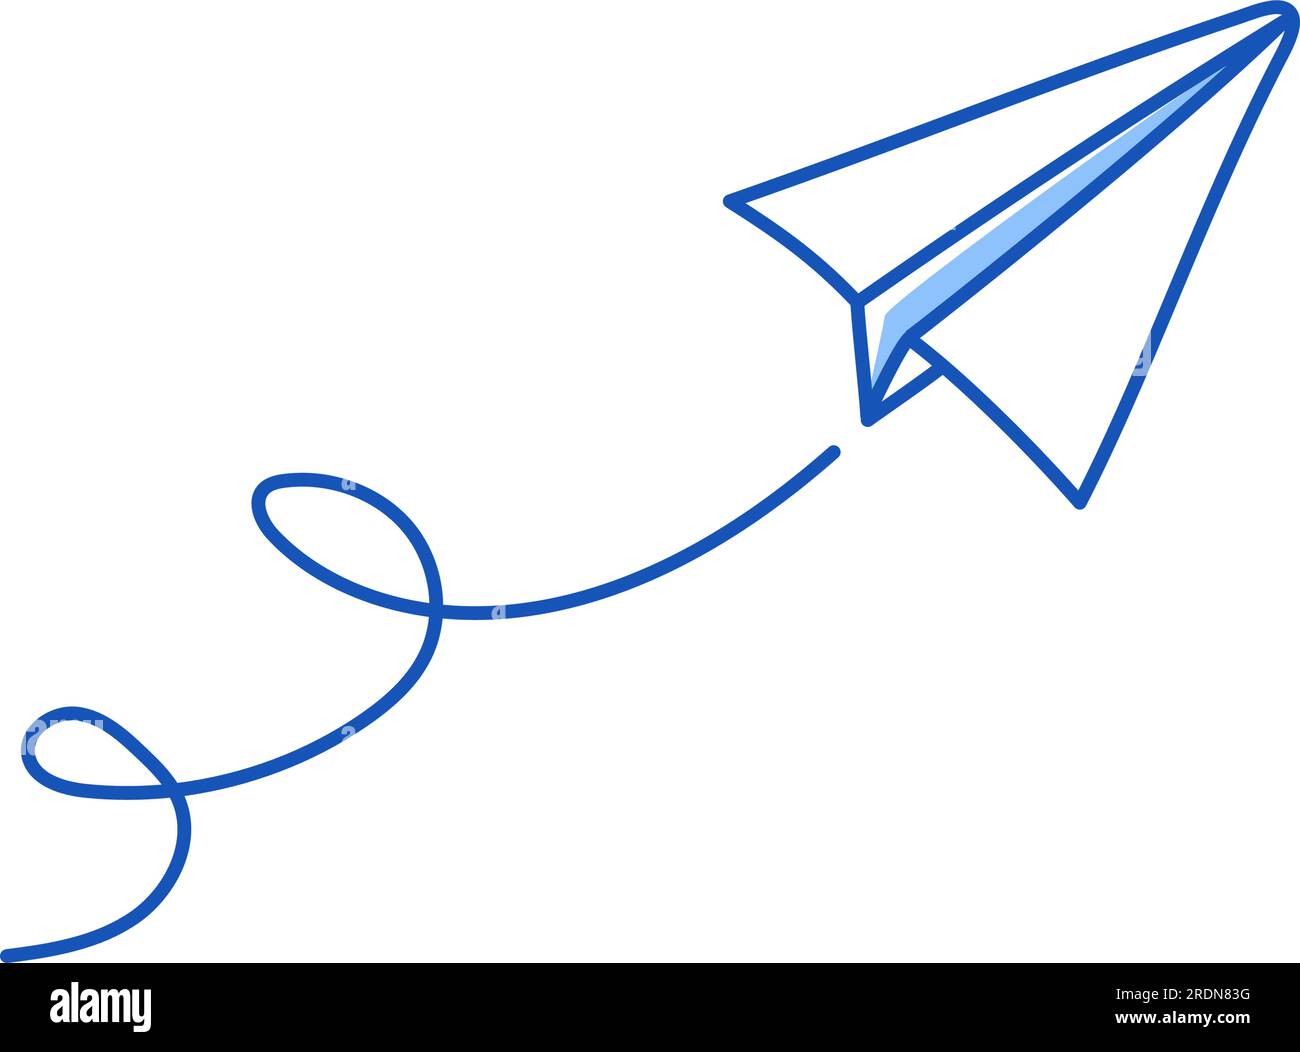 Paper Airplane. Sketch Flying Plane. Doodle Outline Illustration Royalty  Free SVG, Cliparts, Vectors, and Stock Illustration. Image 187654995.